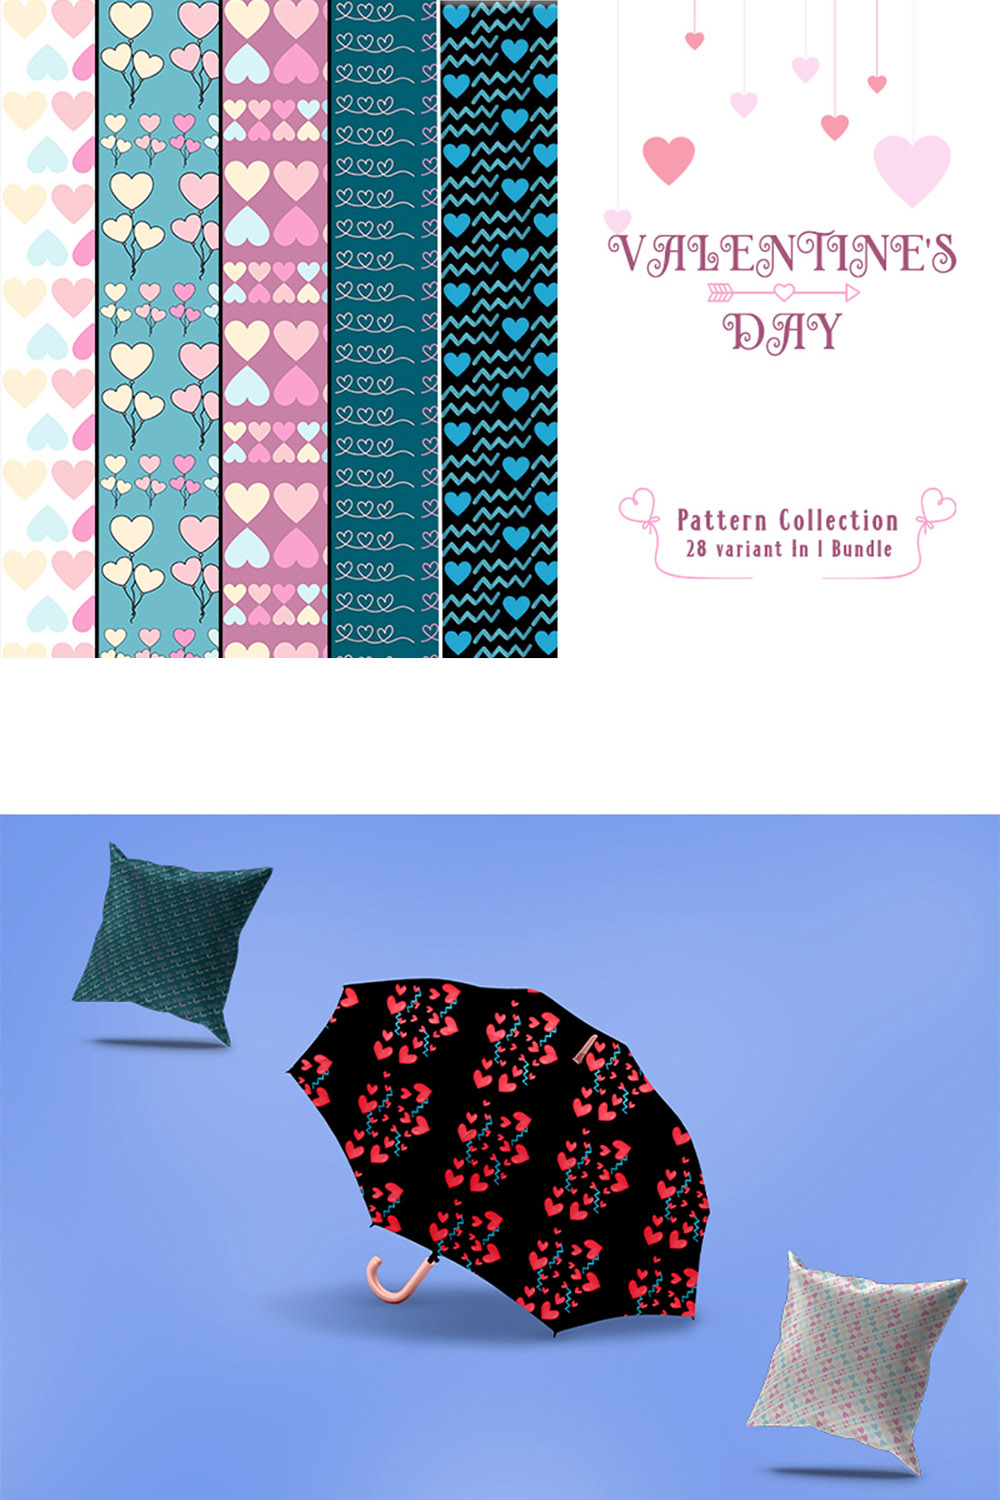 Pack of images of beautiful patterns on the theme of Valentine's Day